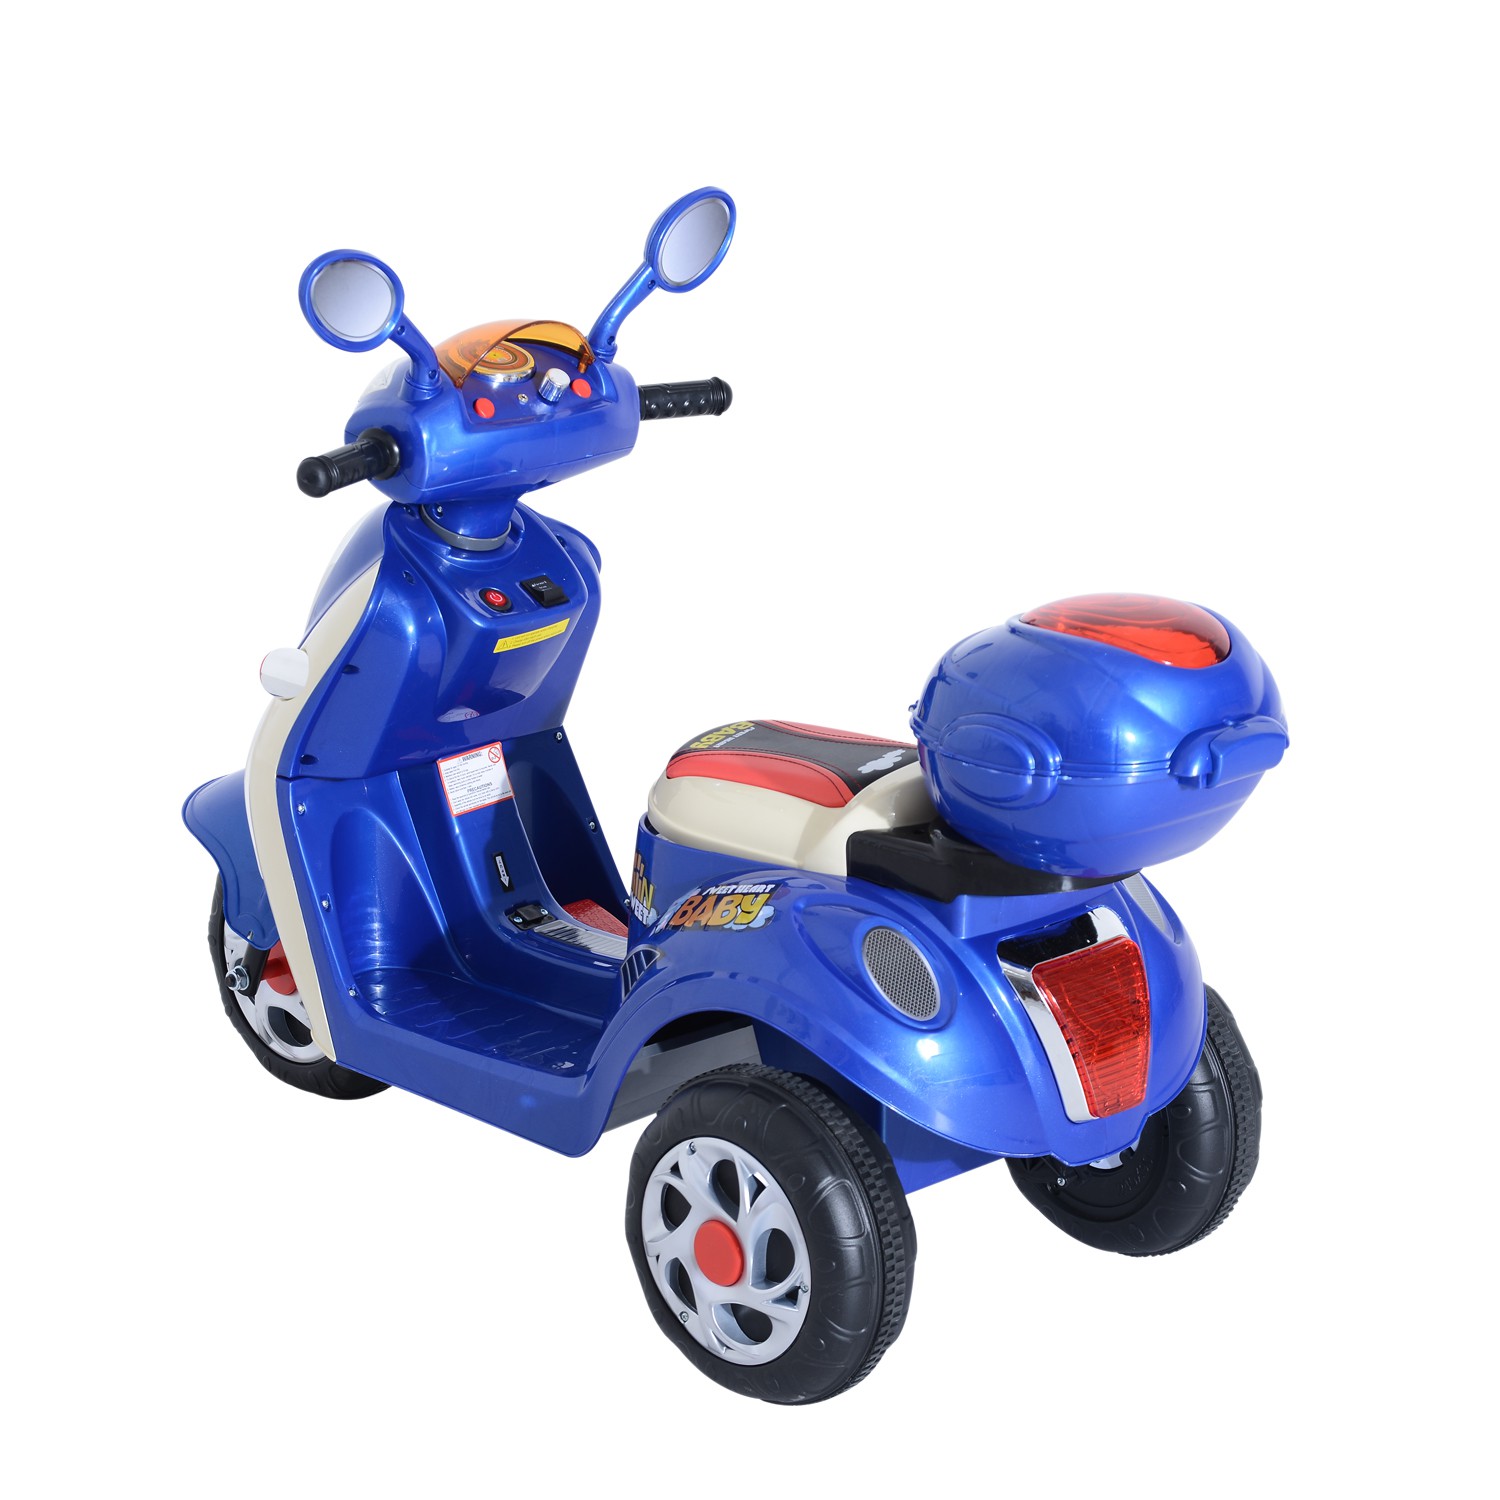 Aosom 6V Kids Ride On Electric Moped Scooter - Blue - Powered Riding ...